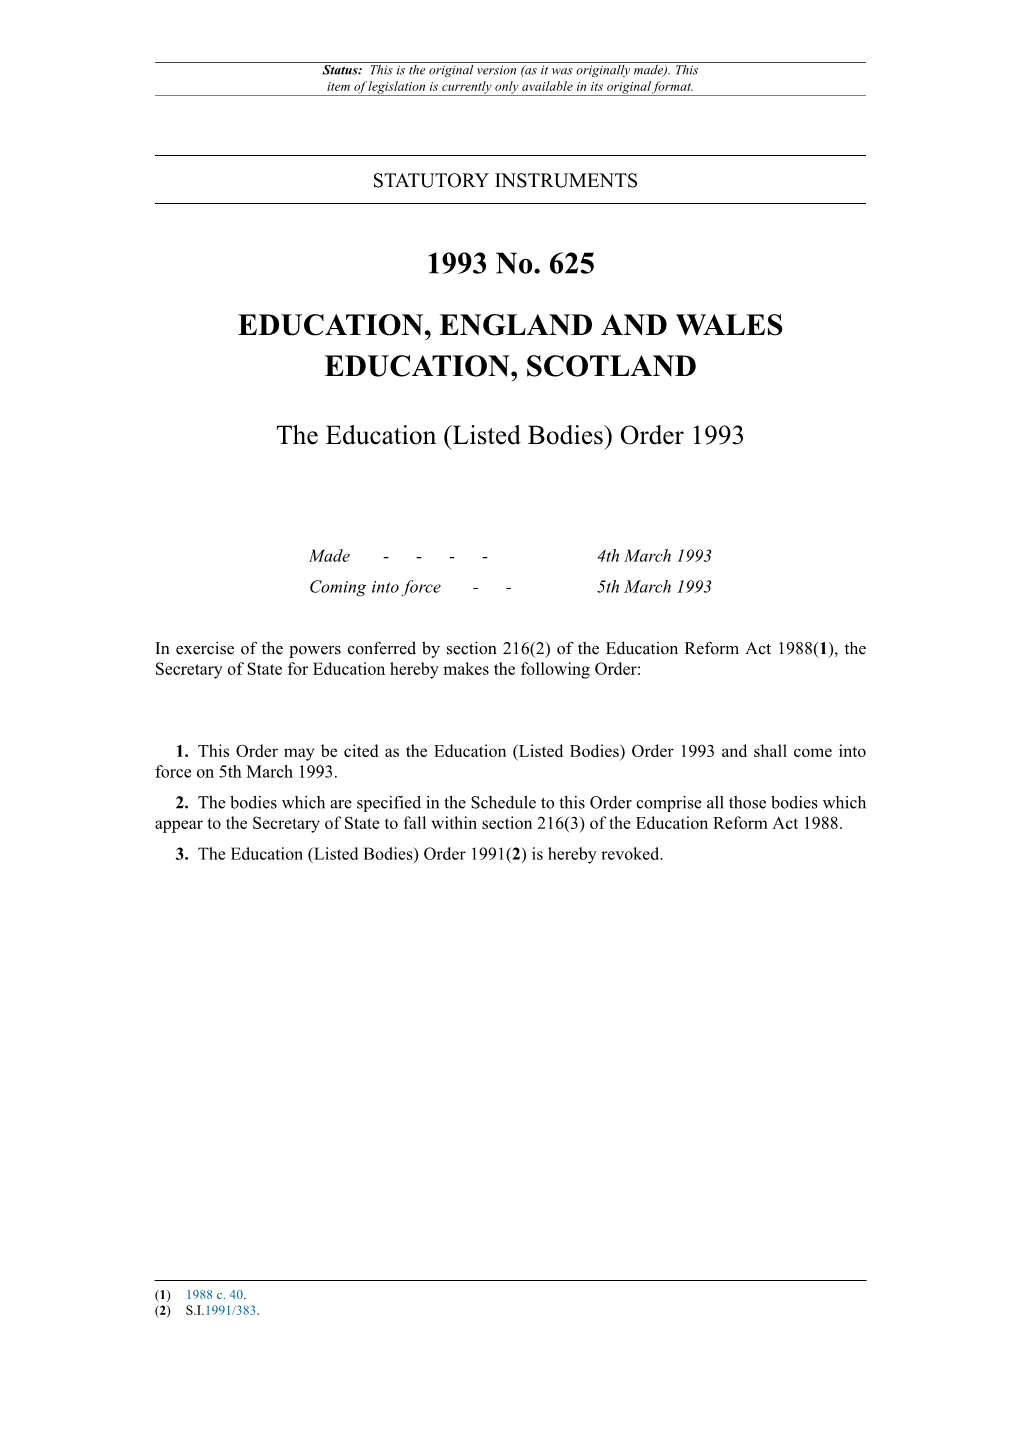 The Education (Listed Bodies) Order 1993